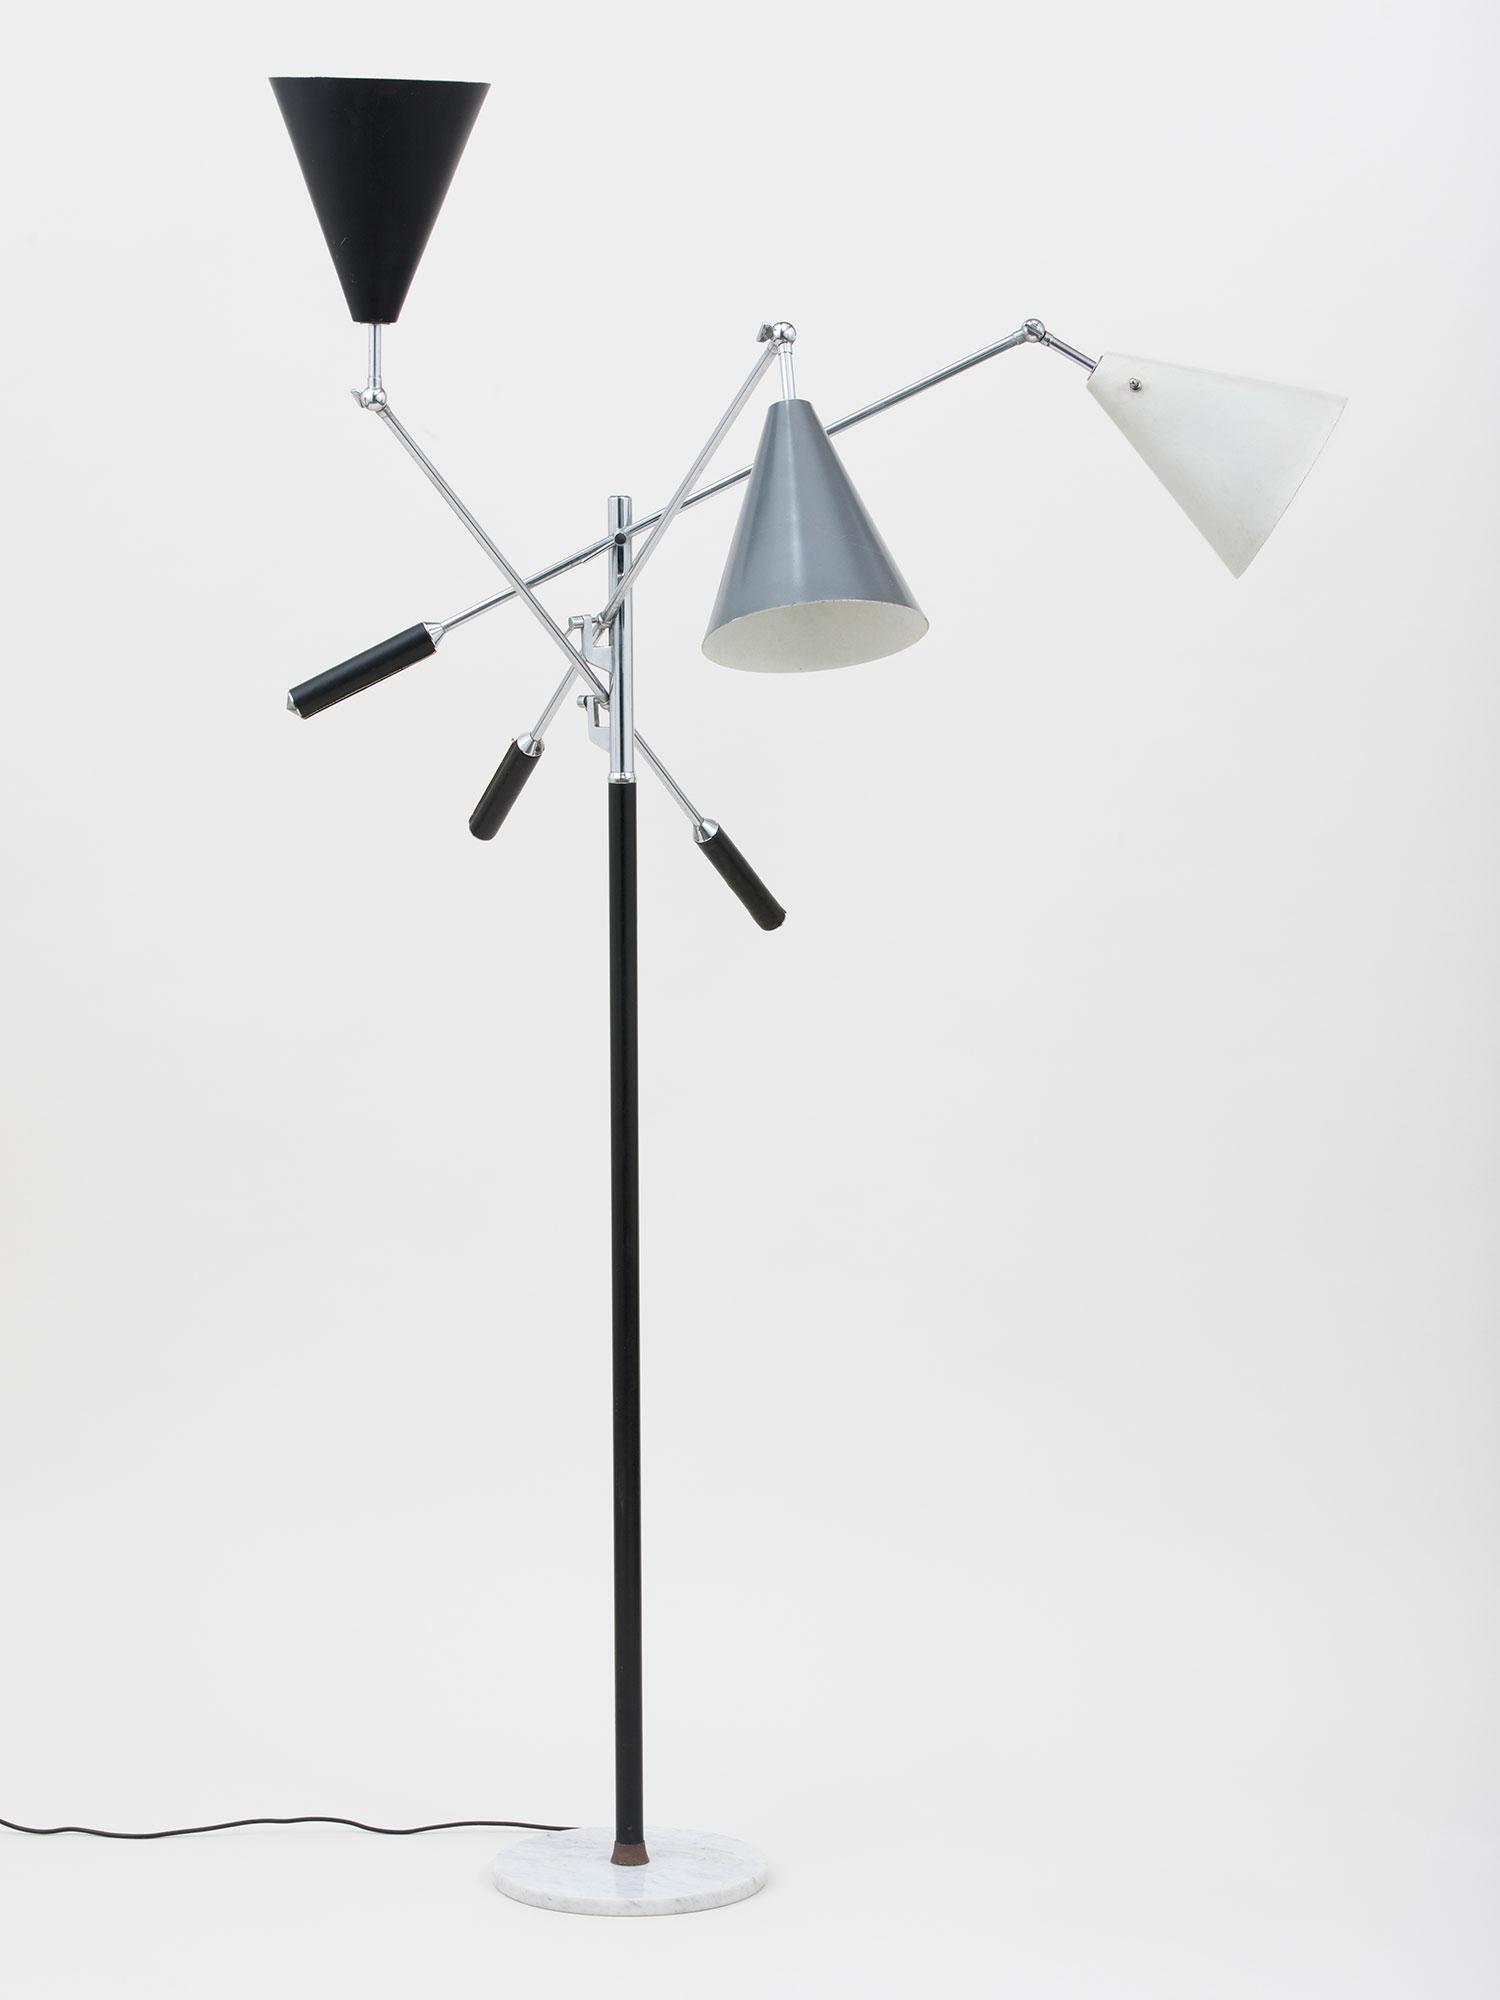 Marble-based version of the iconic 3-arm design from the Milan Triennale of 1951. Features three different enameled metal shades in black, grey and white, along with leather handle grips and chrome-plated, articulating arms.